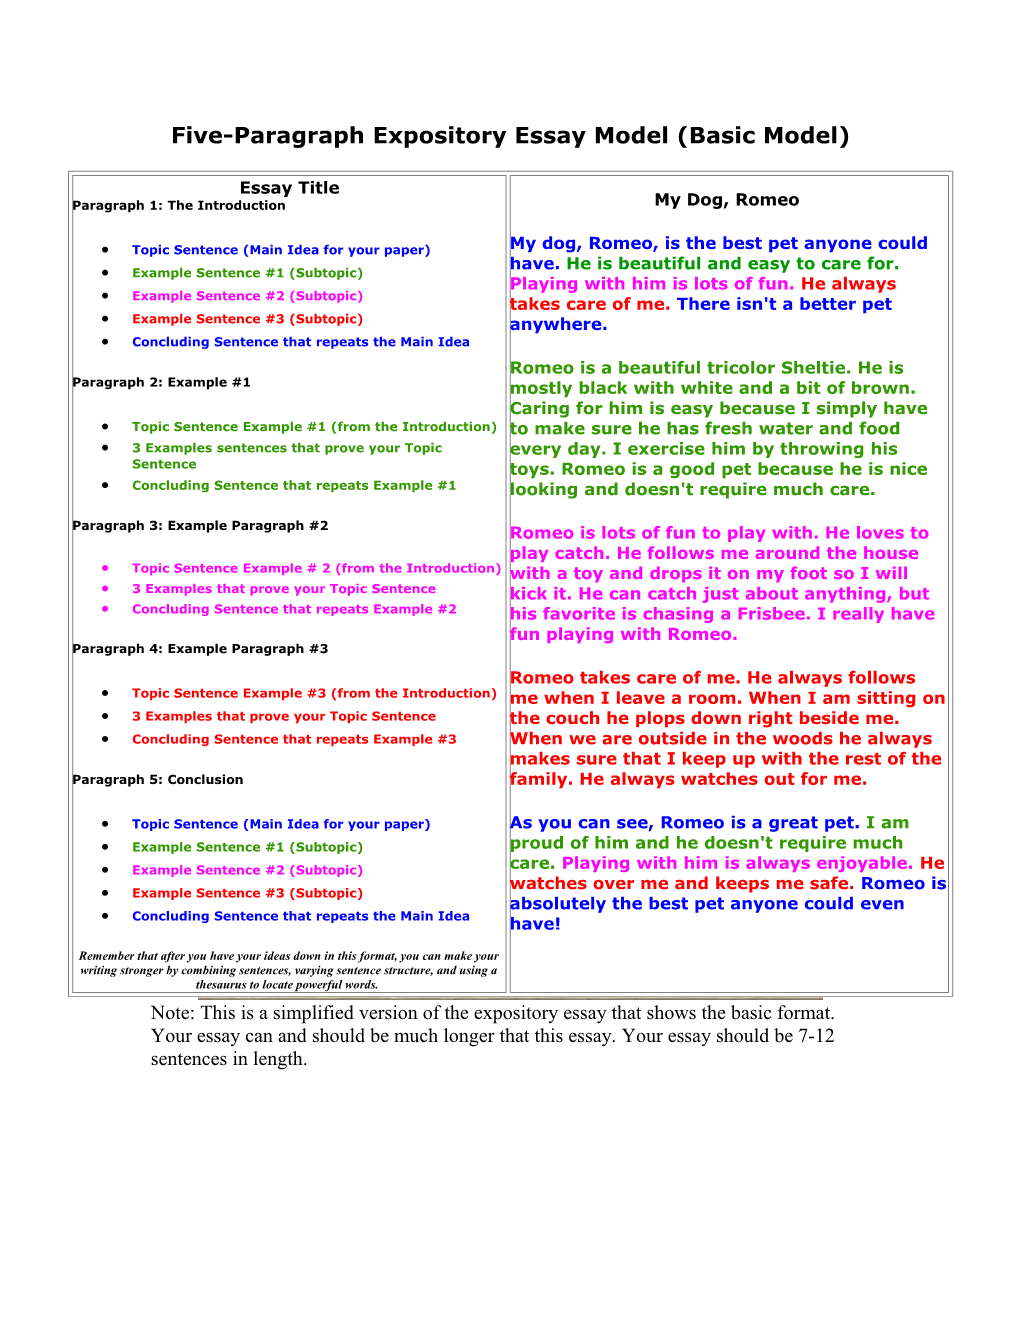 Five-Paragraph Expository Essay Model (Basic Model)